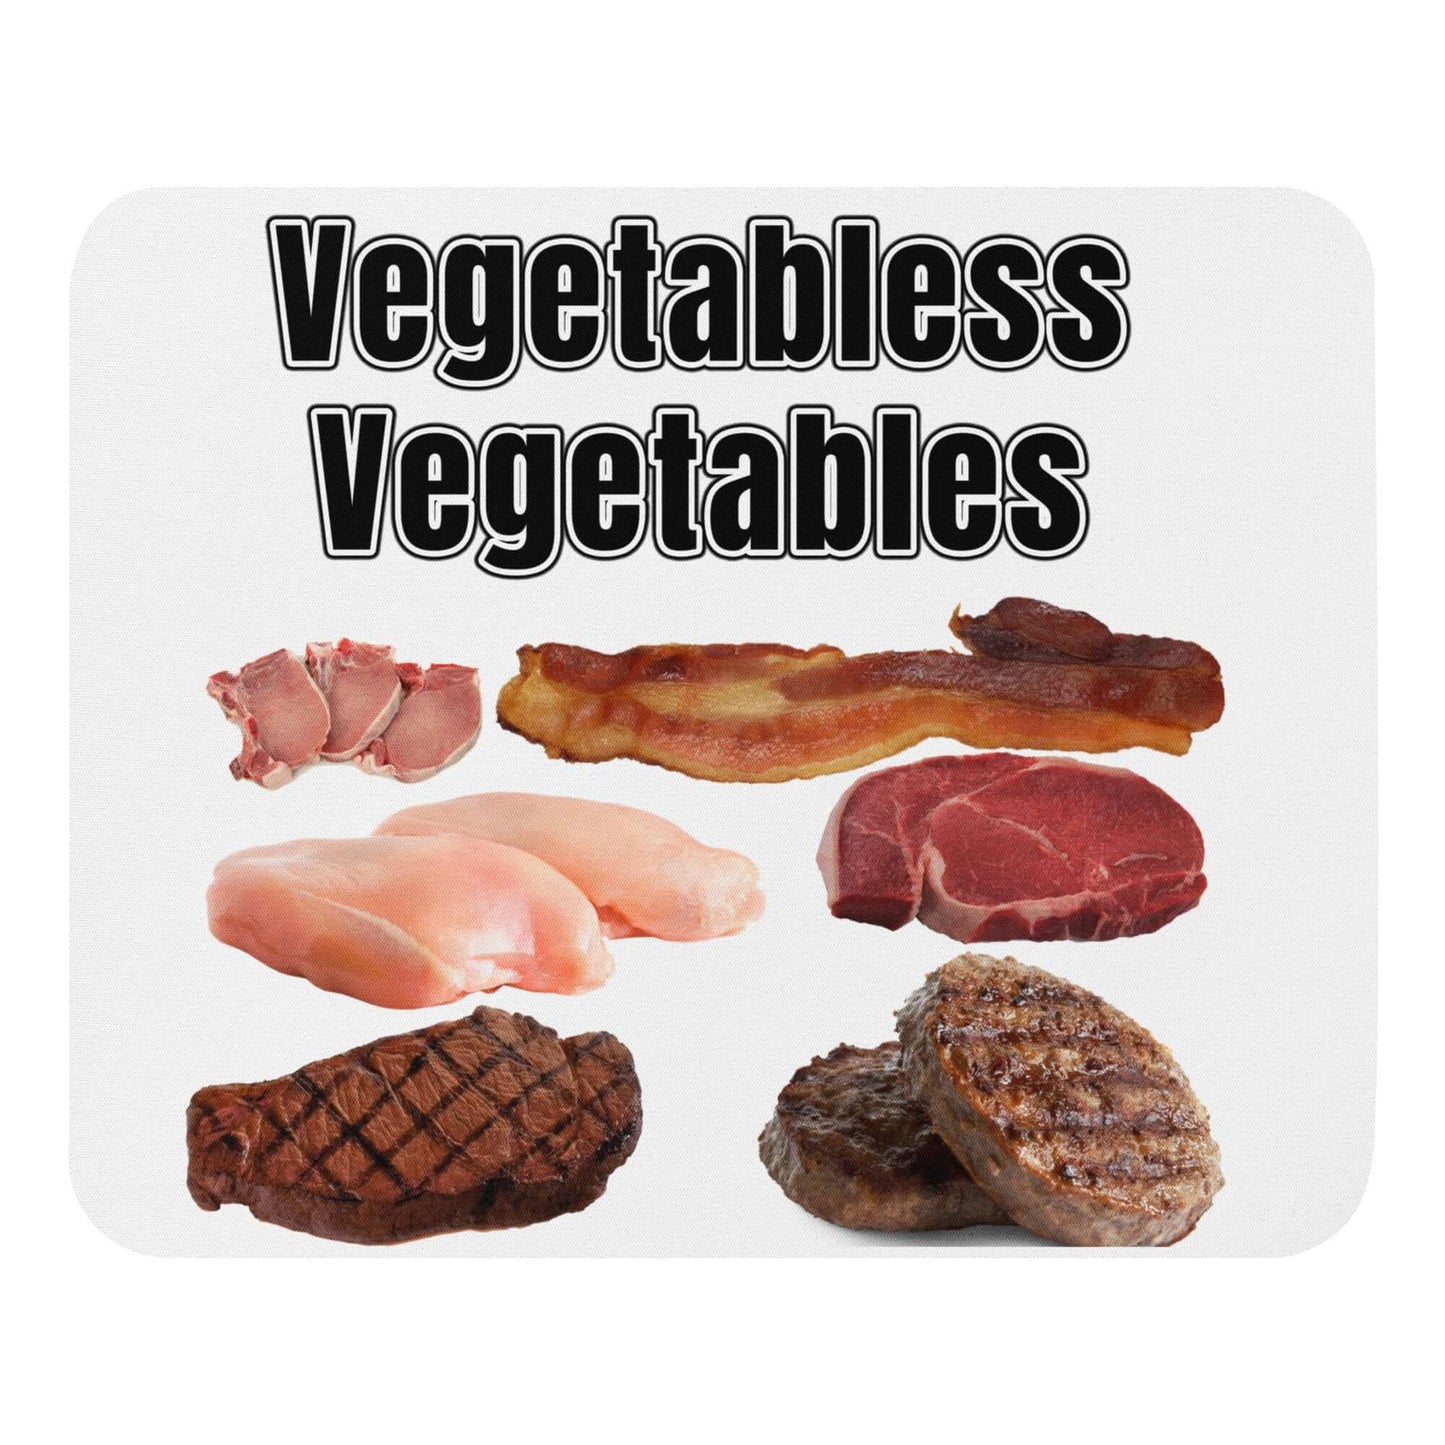 Vegetabless Vegetables - Mouse pad Ancestral Diet Atkins Diet Baconator Barbecue Butchery Carnivorous Diet Fishing Free-Range Meat Game Meat Grass-Fed Meat Grilling High-Fat Diet Hunting Ketogenic Low-Carb Diet Meat Omnivore Paleo Predator. Meat Eater Protein Protein Shake Red Meat Steakhouse White Meat